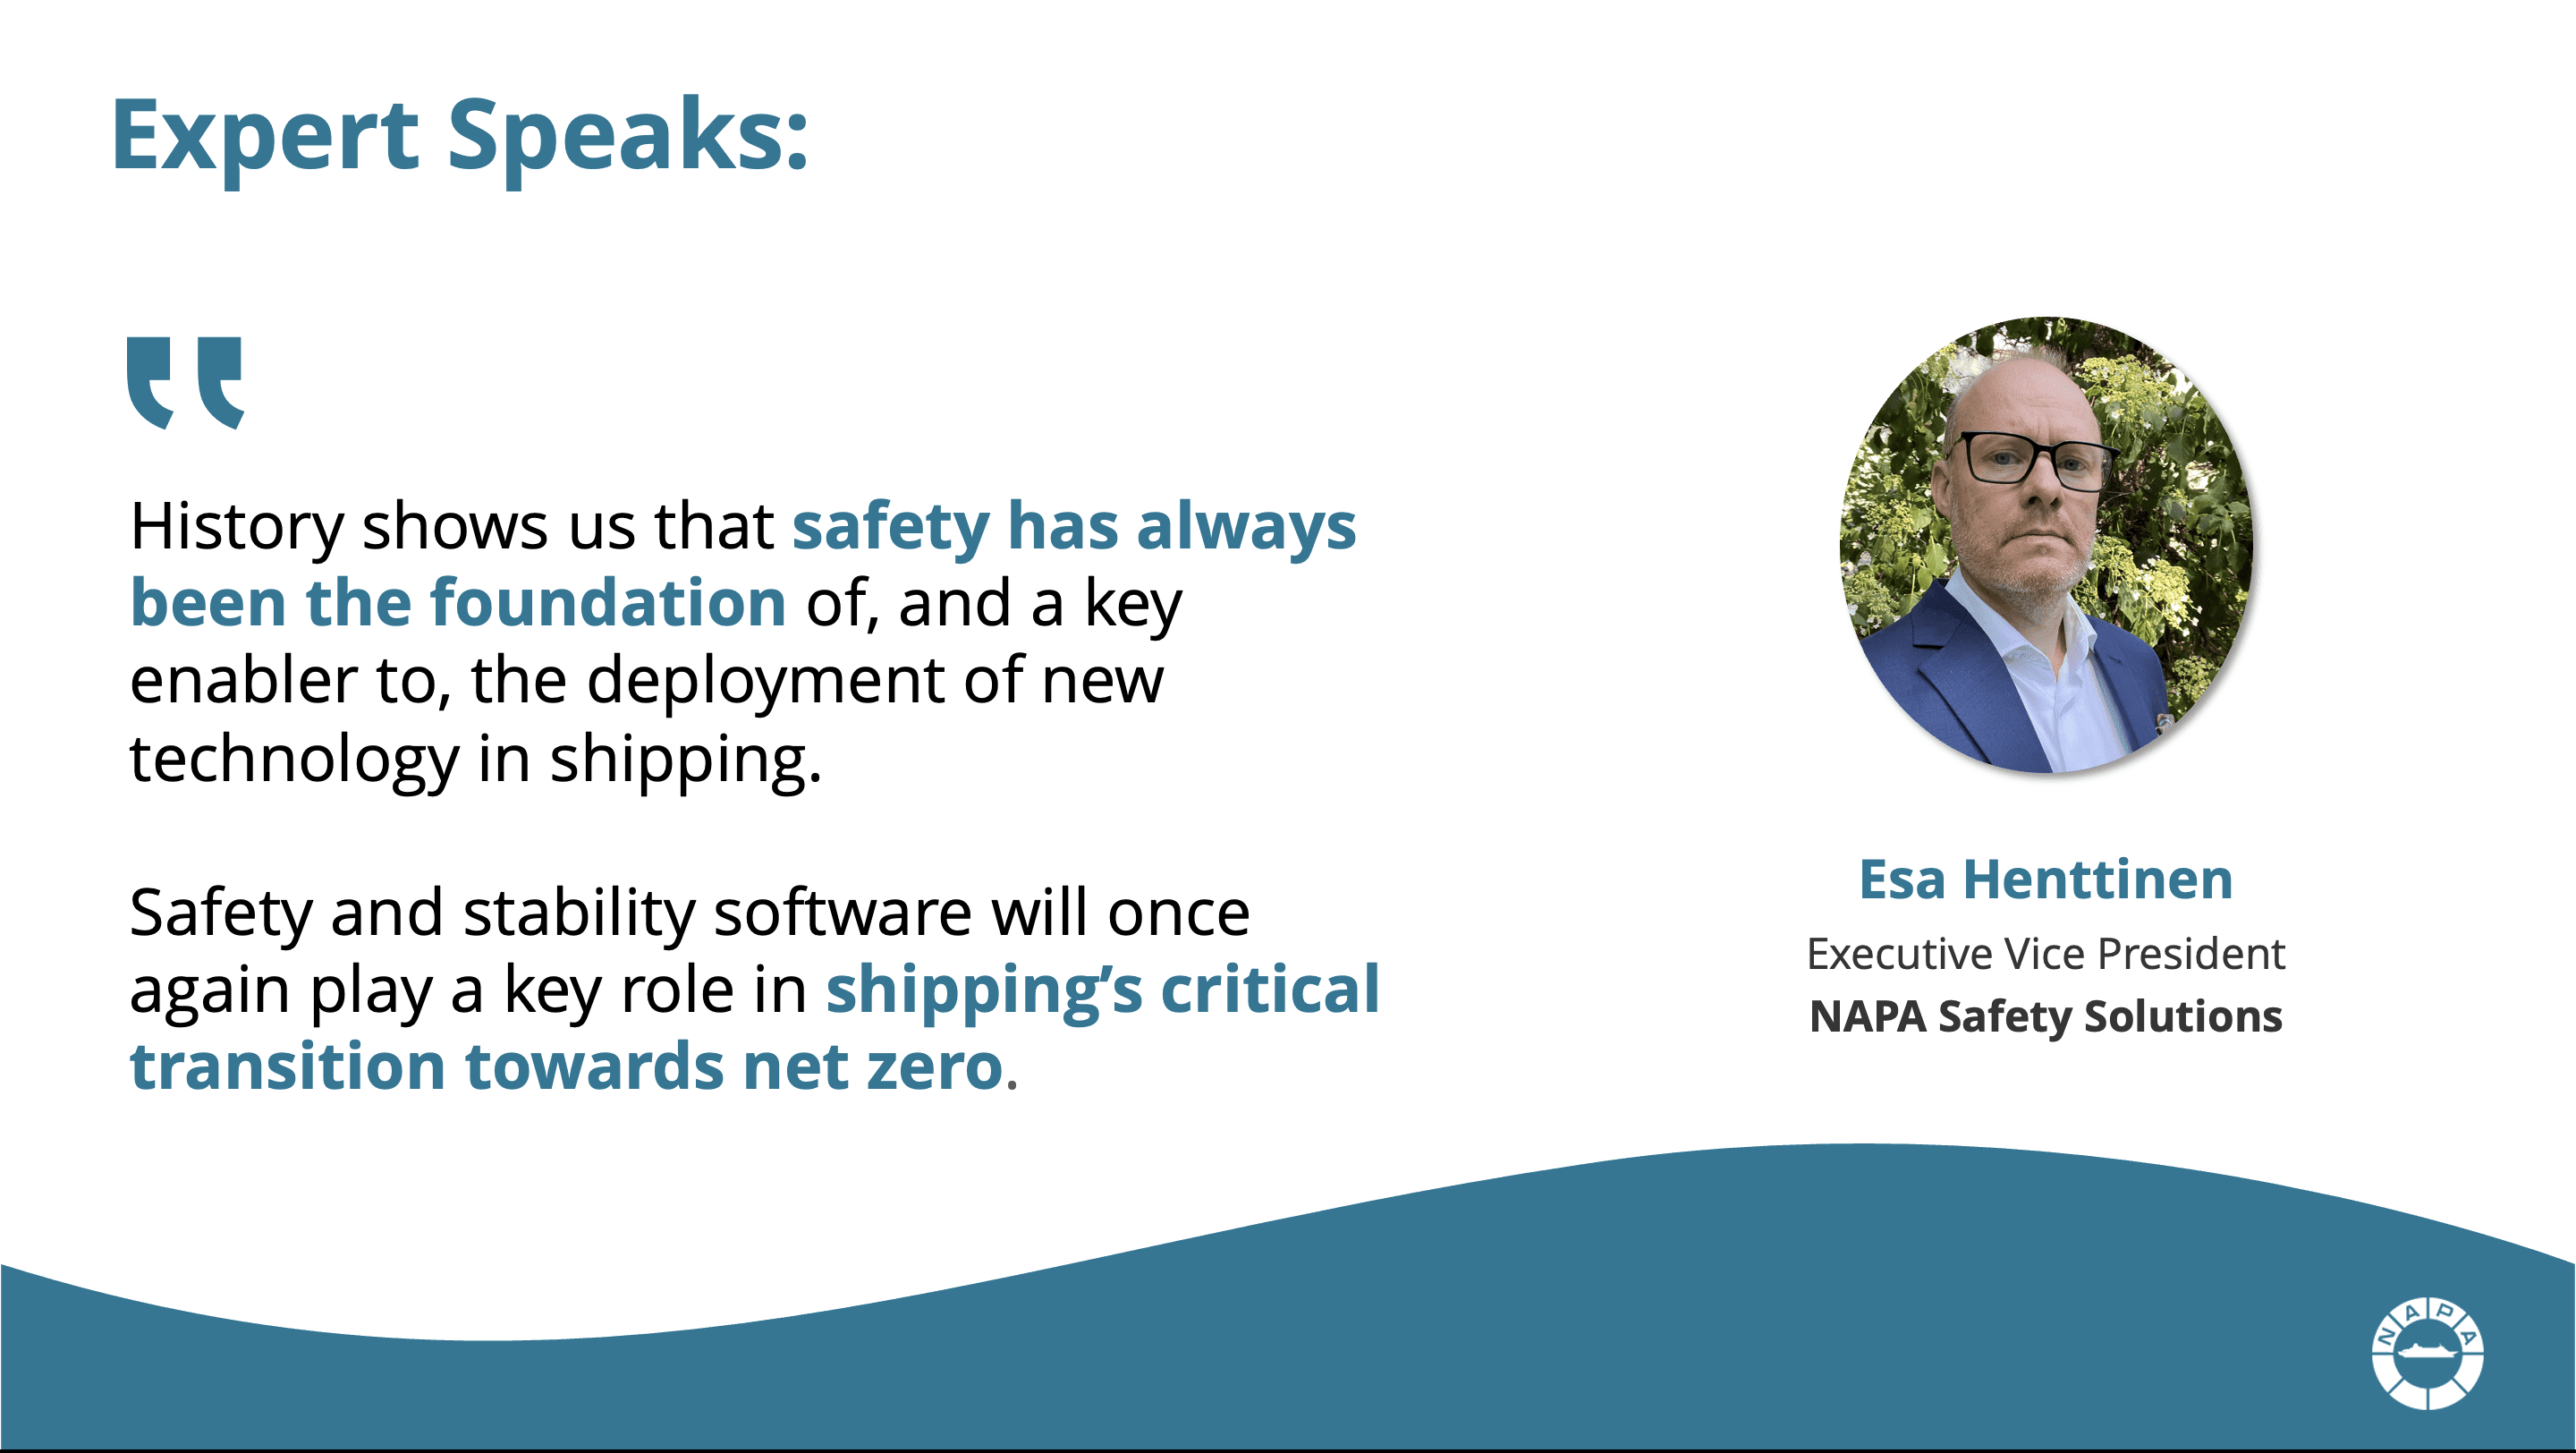 Managing new risks and technologies is not unique to today’s decarbonization transition. History shows us that safety has always been the foundation of, and a key enabler to, the deployment of new technology in shipping.